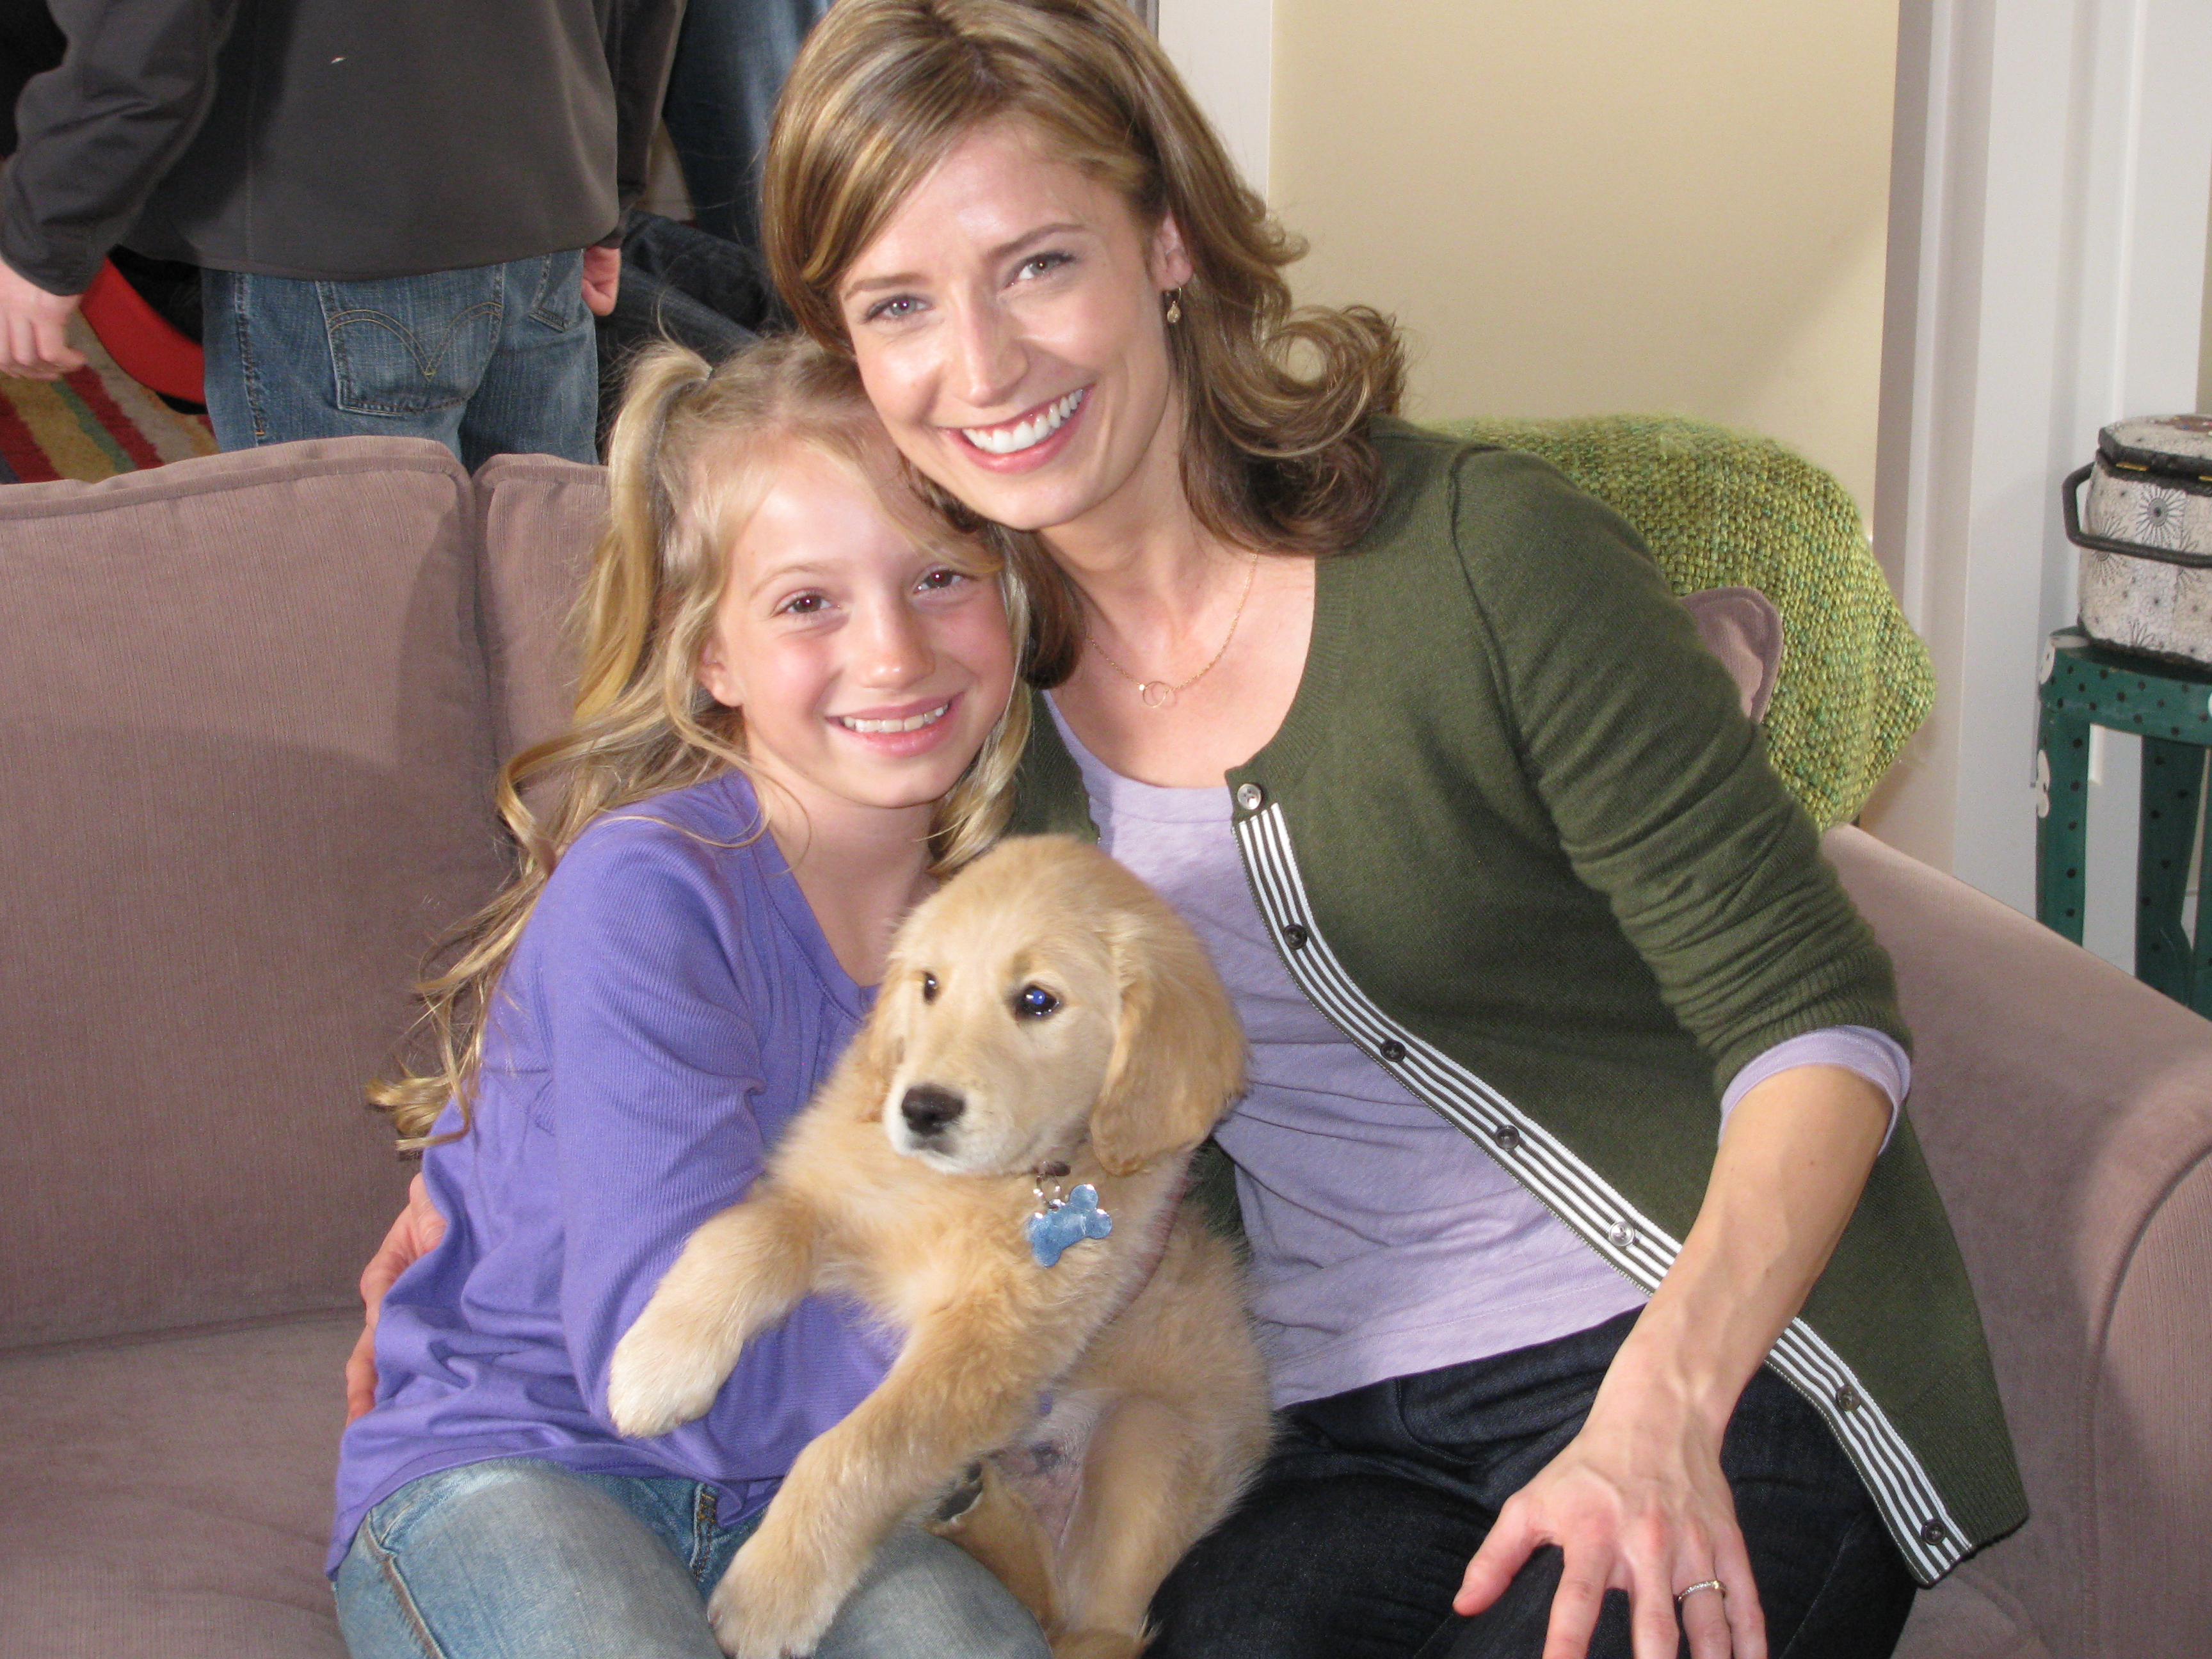 On set of Purina commercial 12-09.